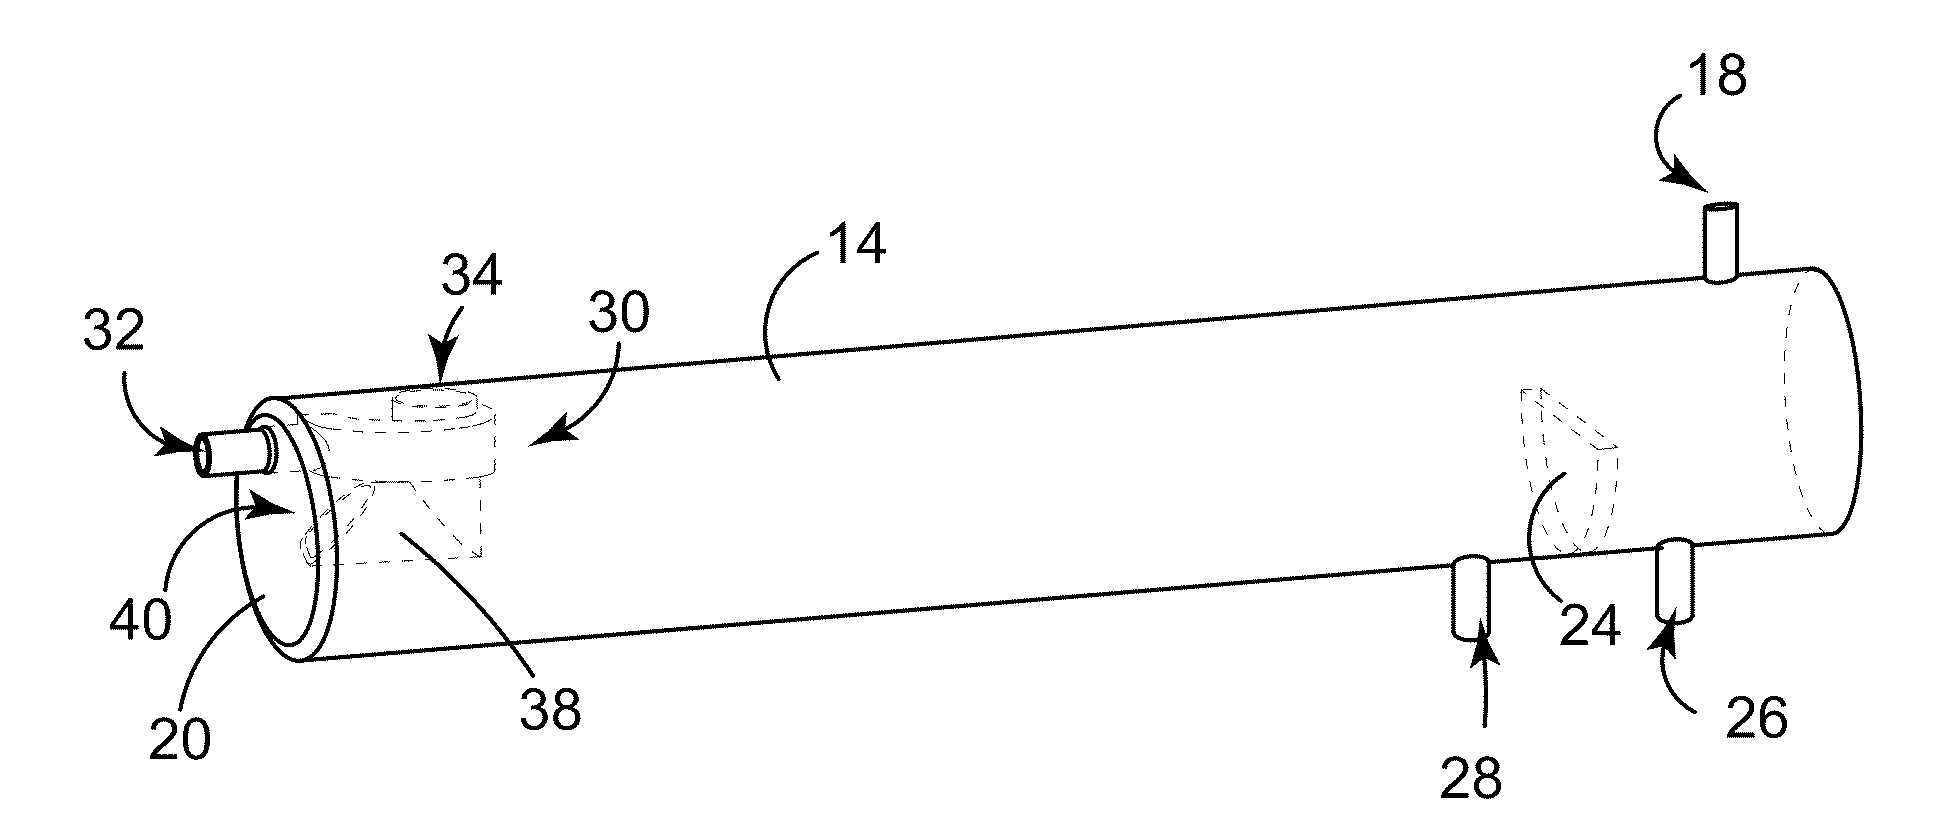 Apparatus for separation of gas-liquid mixtures and promoting coalescence of liquids